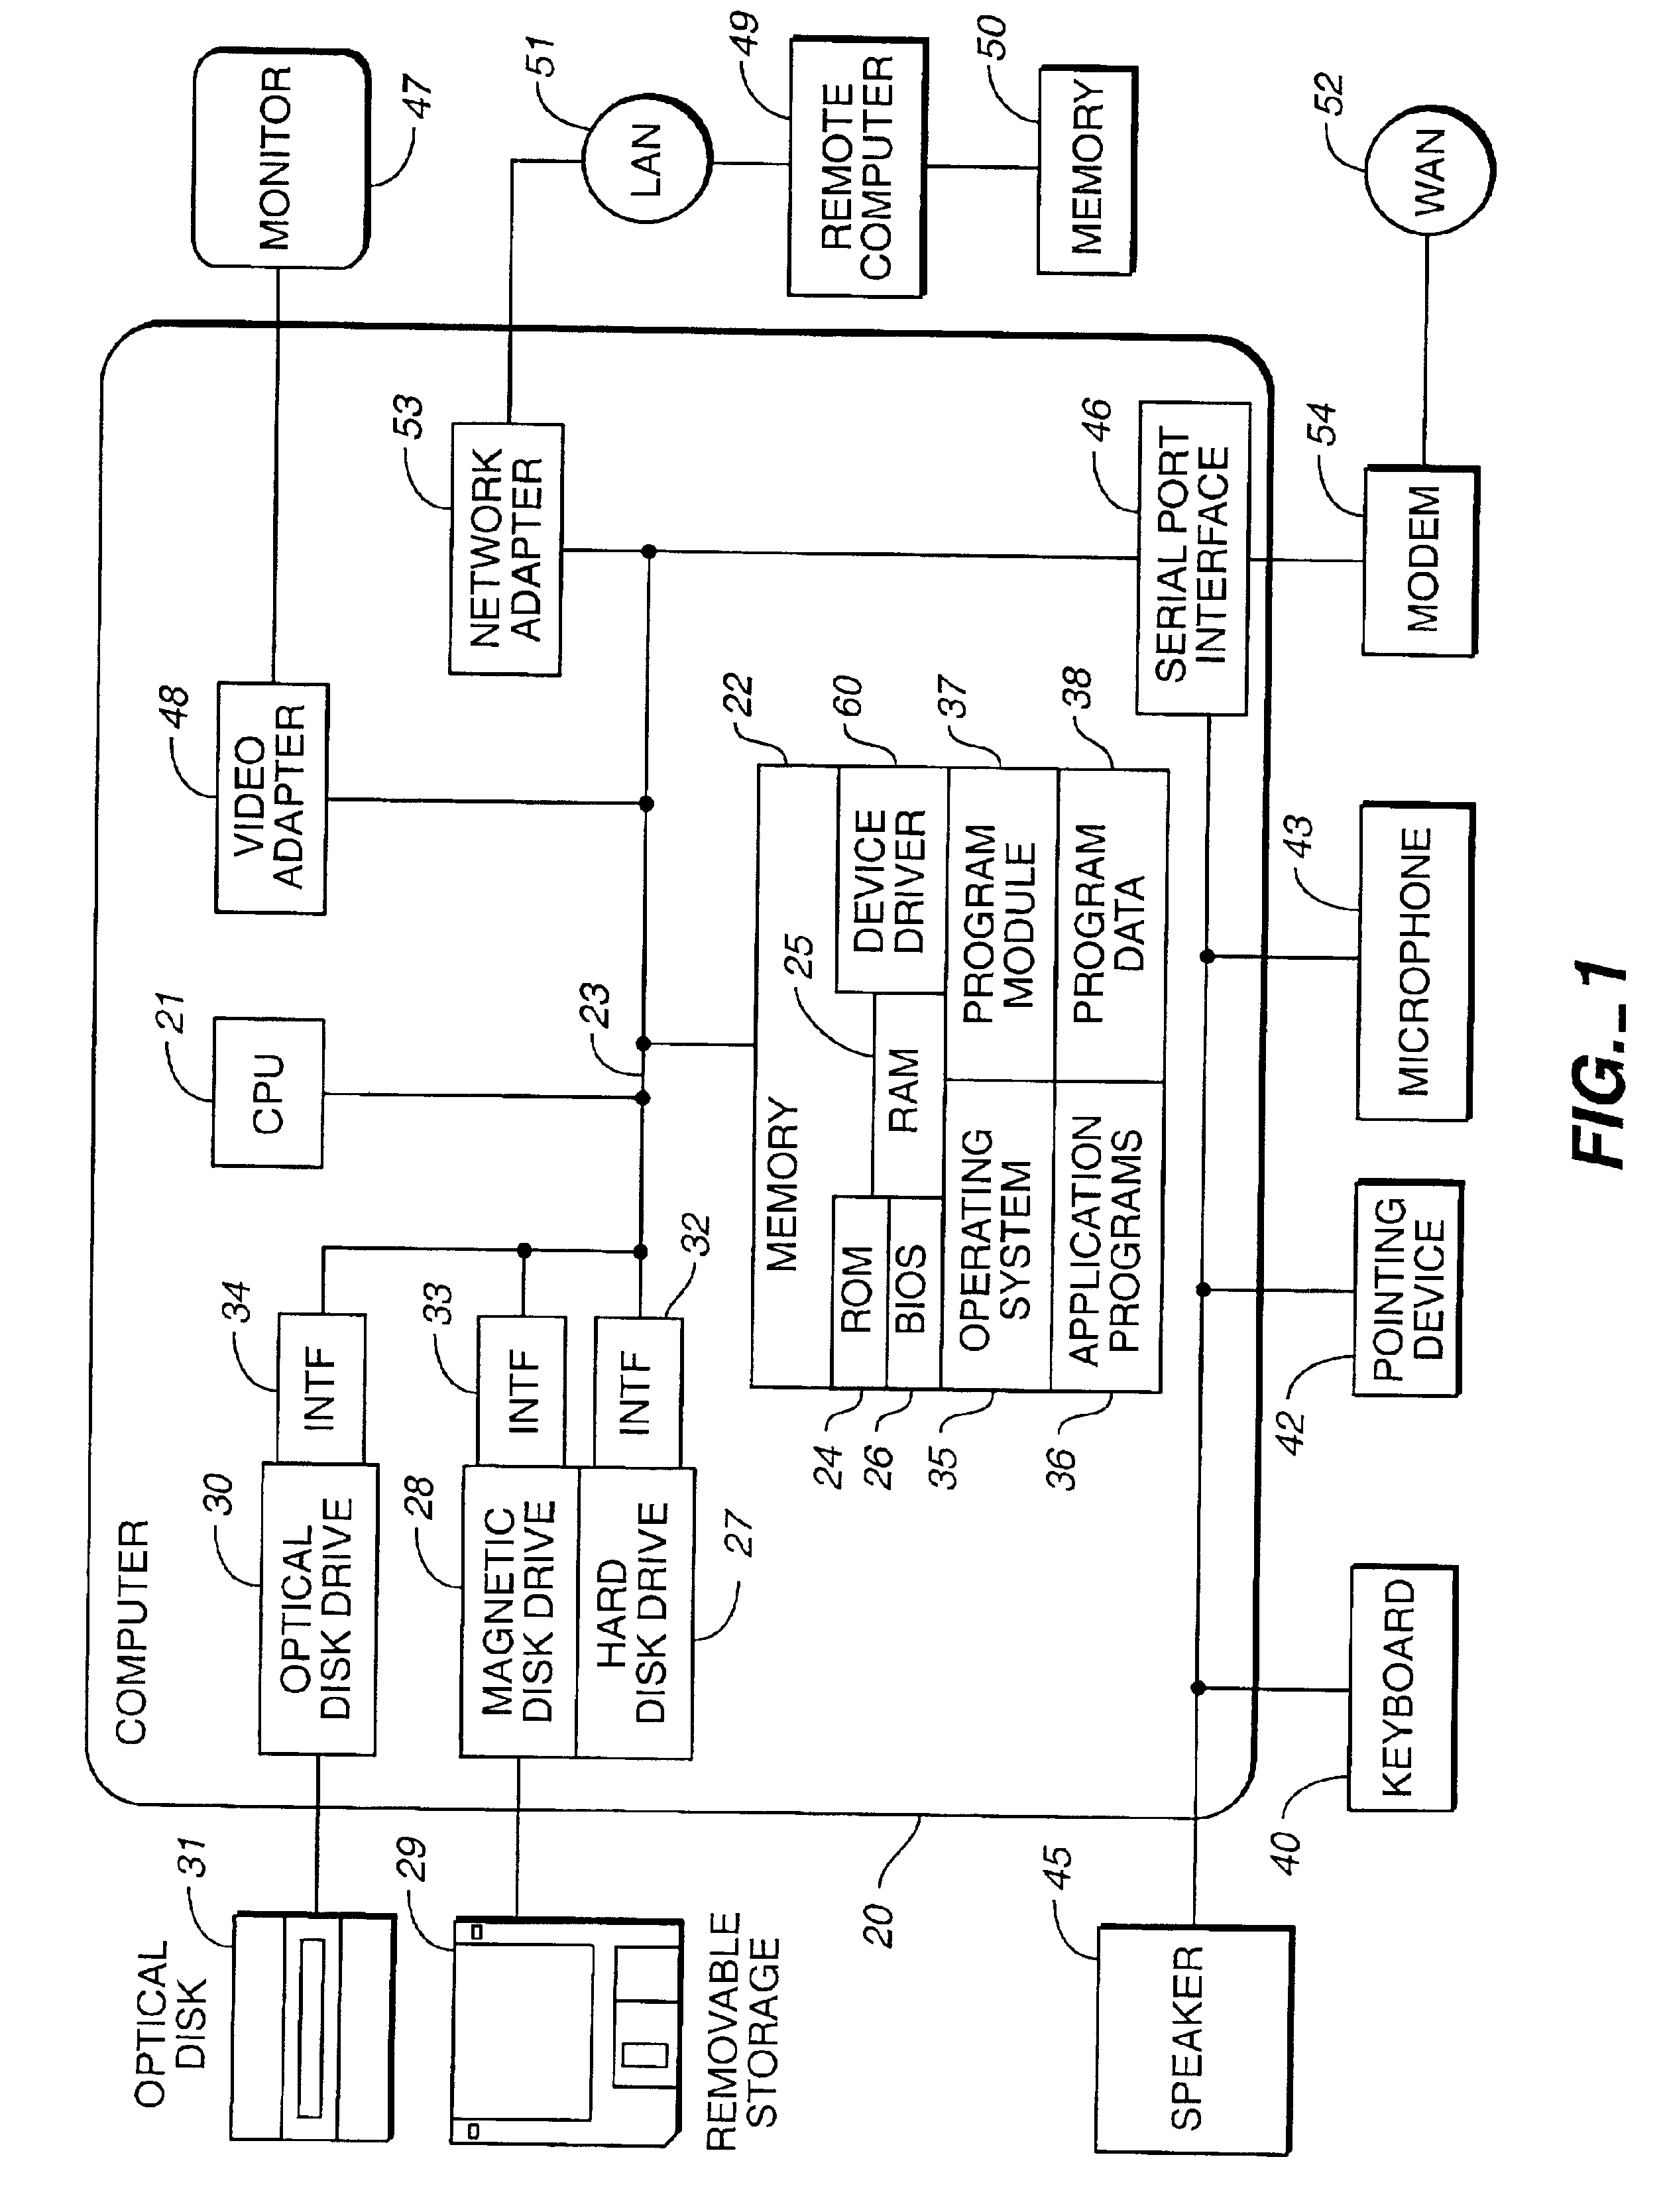 Method and apparatus for generating and displaying N-best alternatives in a speech recognition system